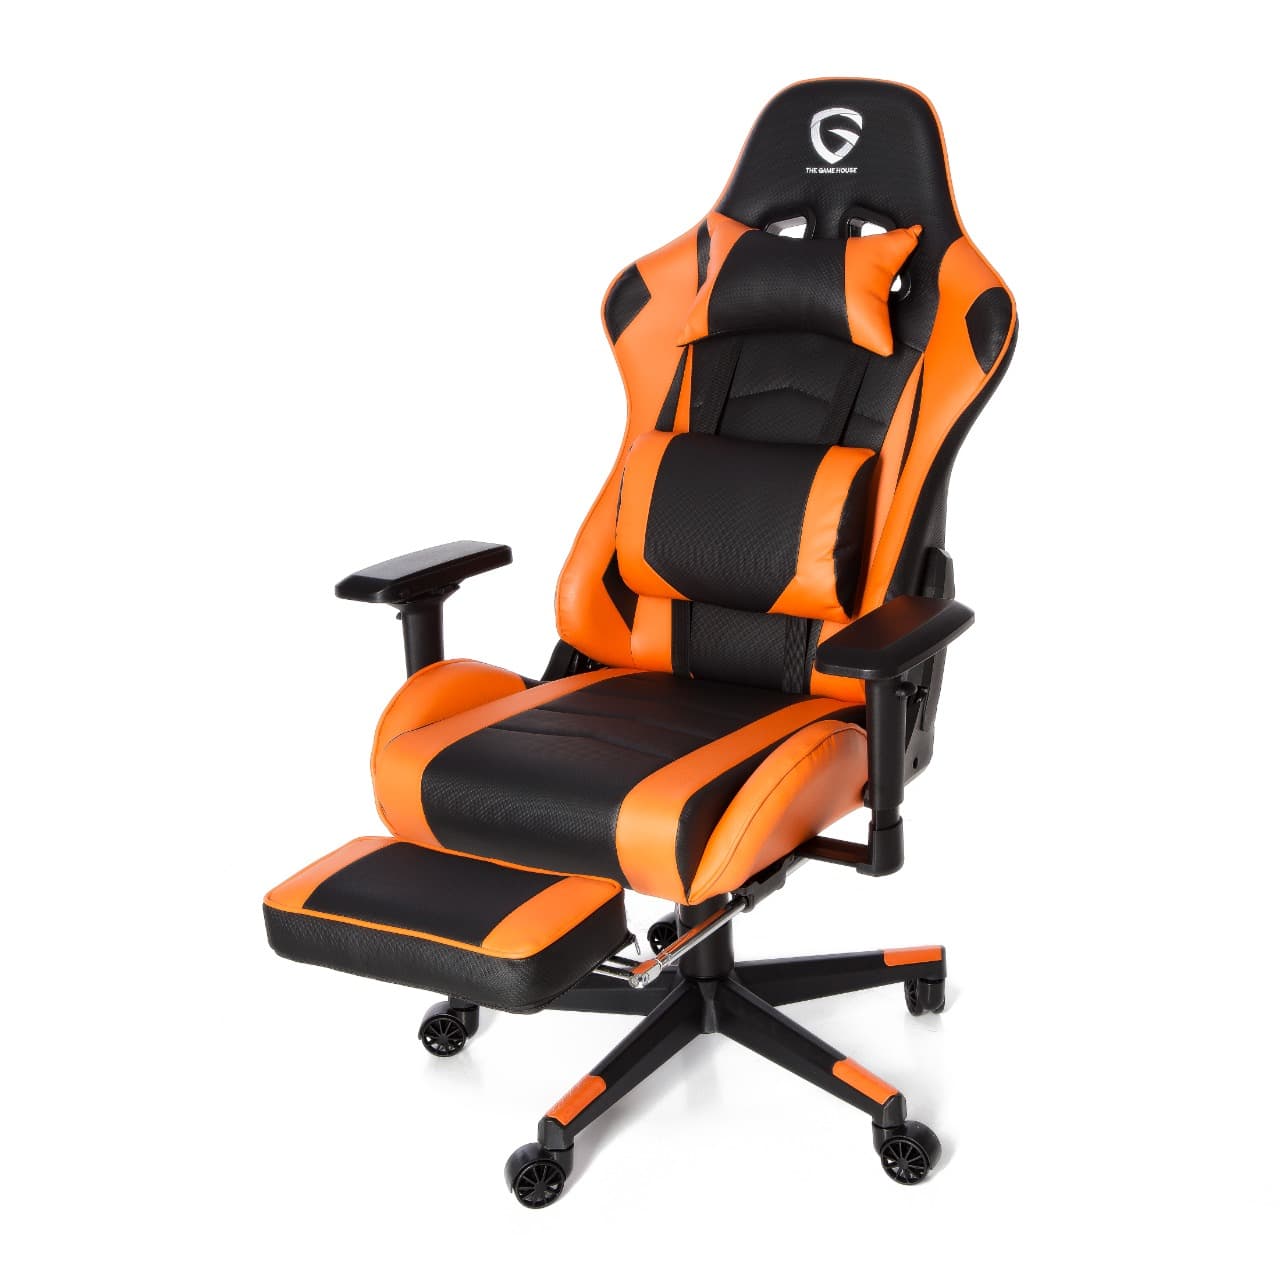 Gamer24hs has gamer chairs with discounts of up to 25 percent and installments without interest